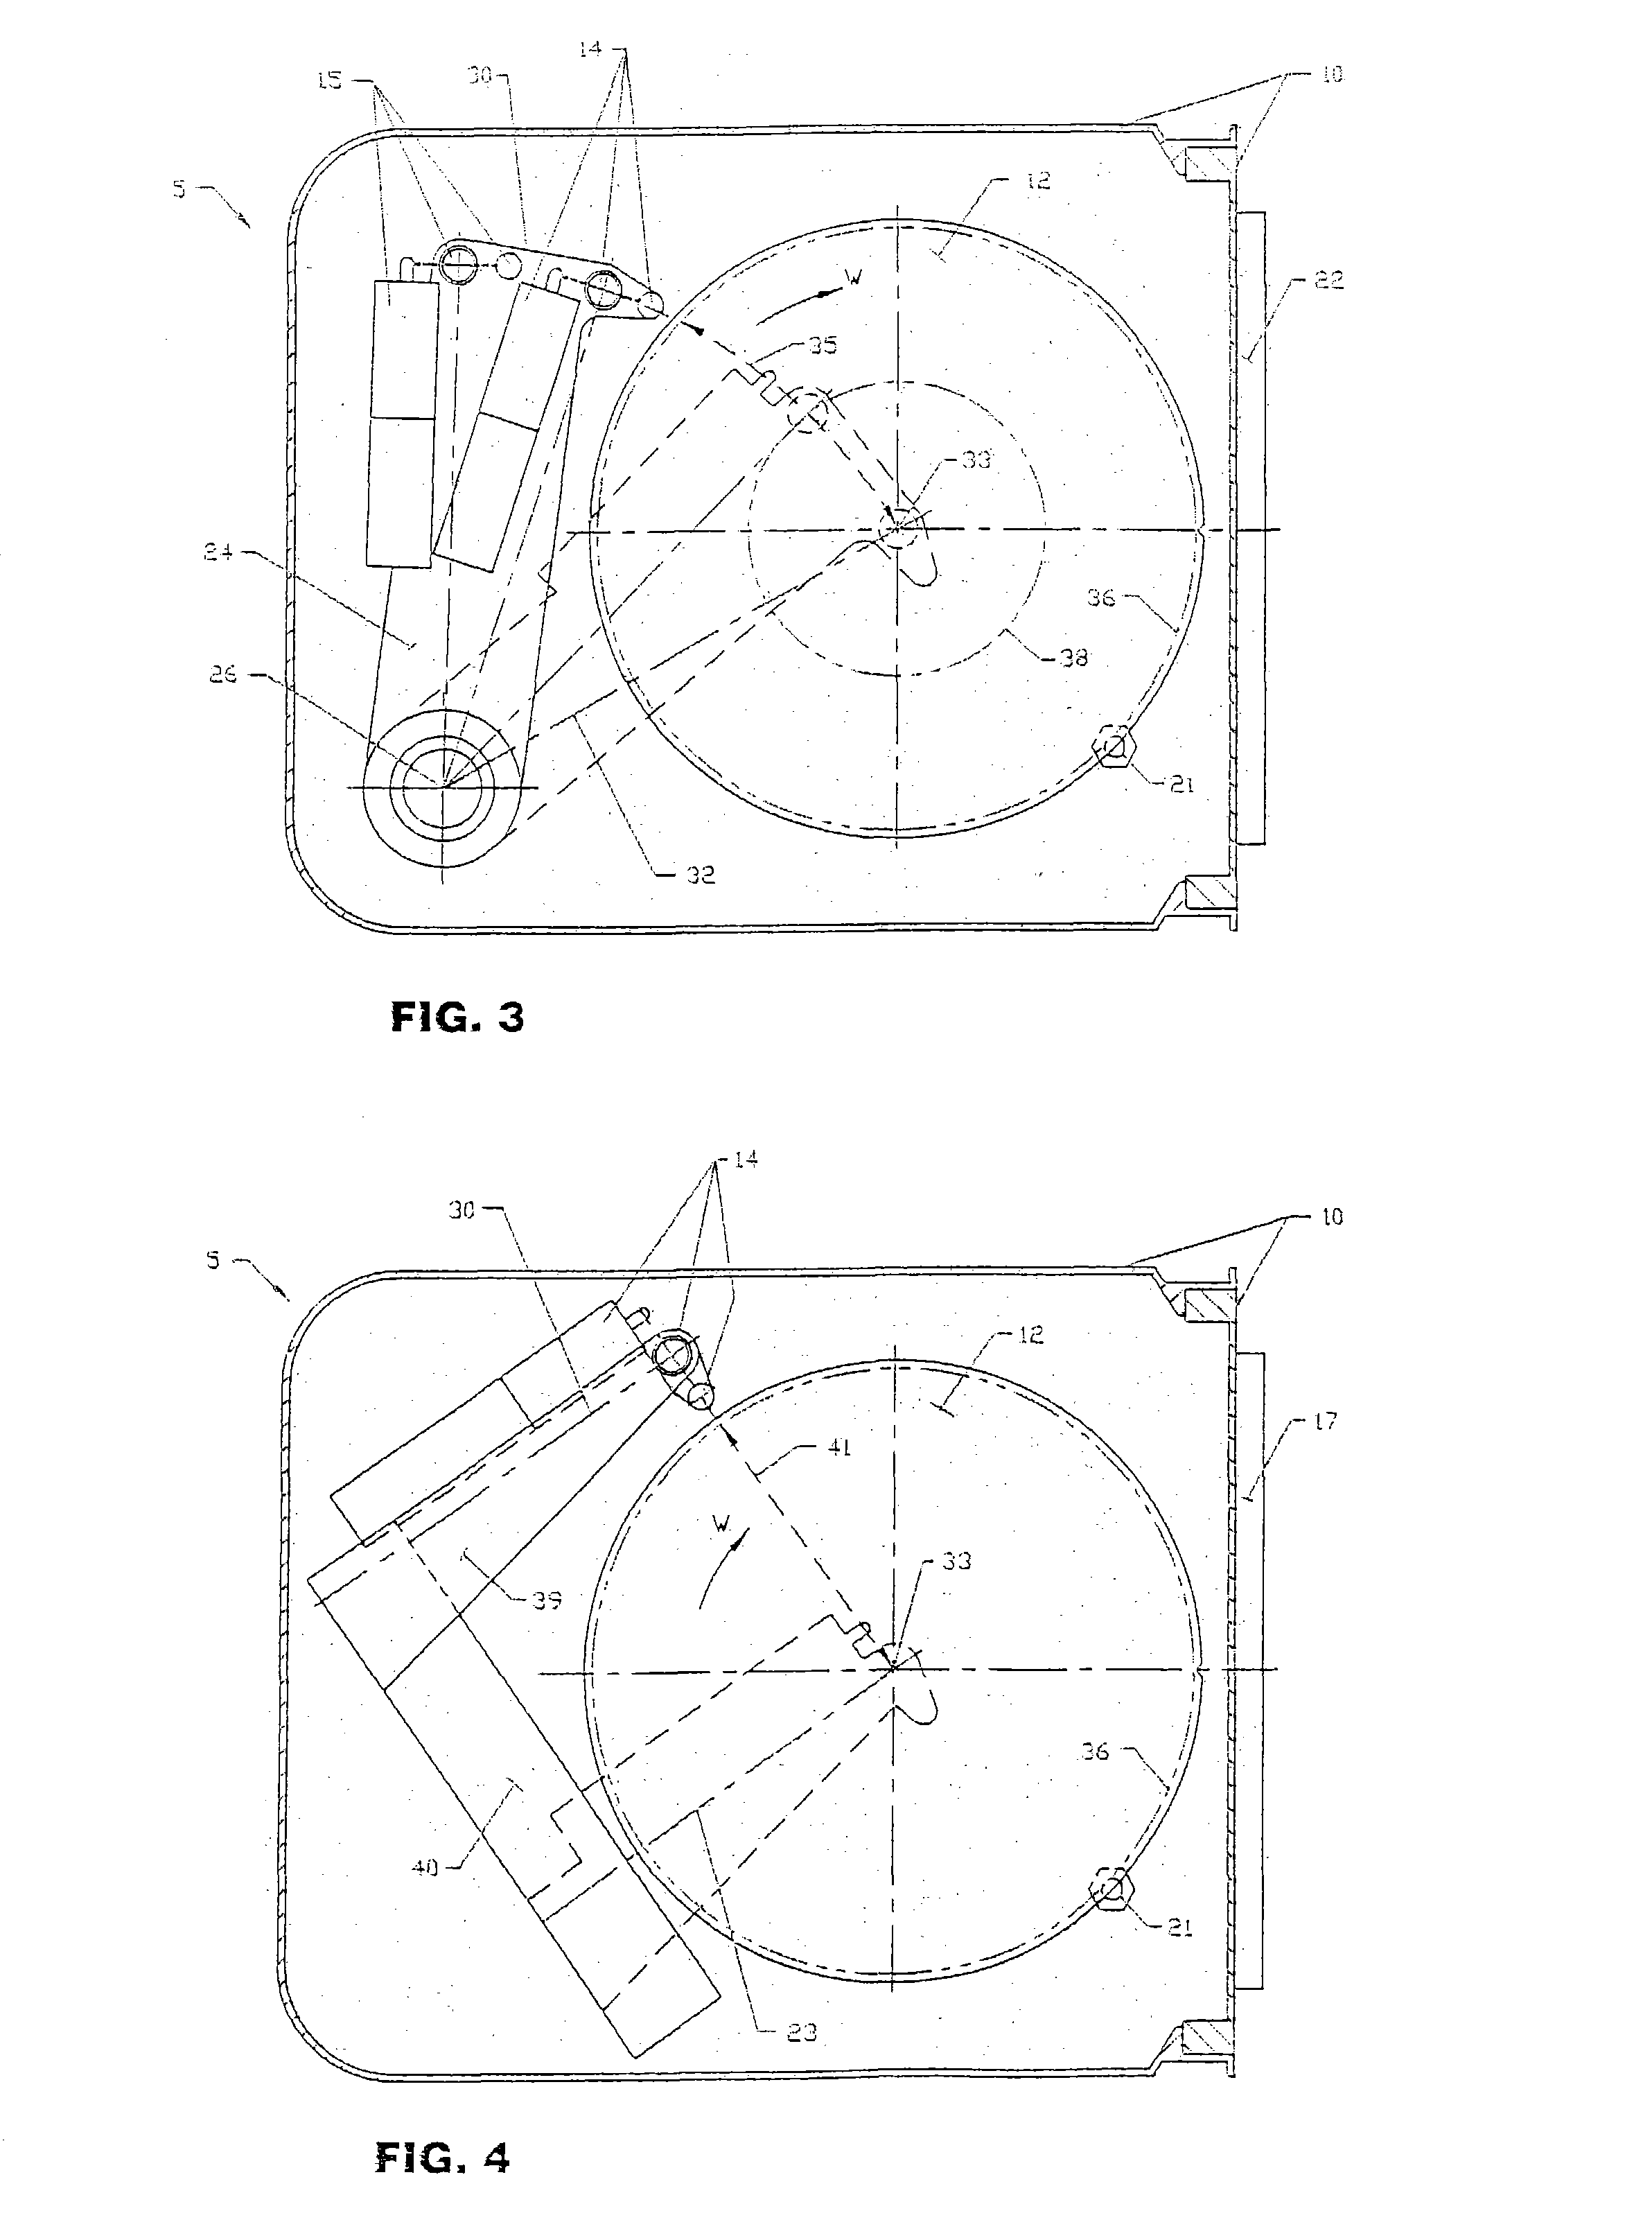 Method and apparatus for locating/sizing contaminants on a polished planar surface of a dielectric or semiconductor material